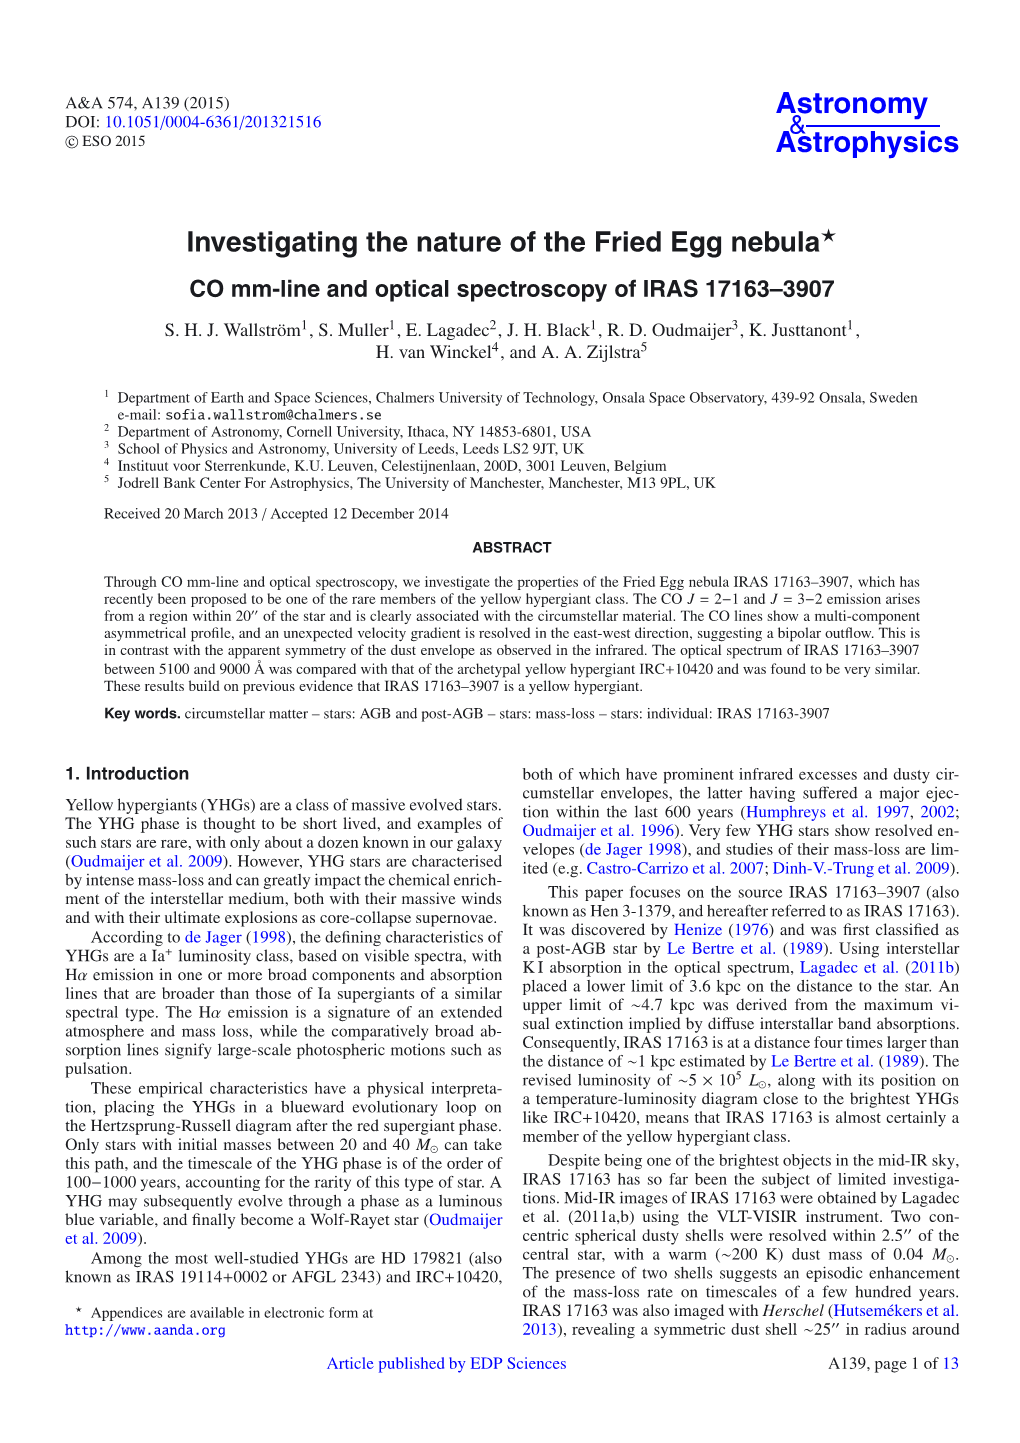 Investigating the Nature of the Fried Egg Nebula⋆